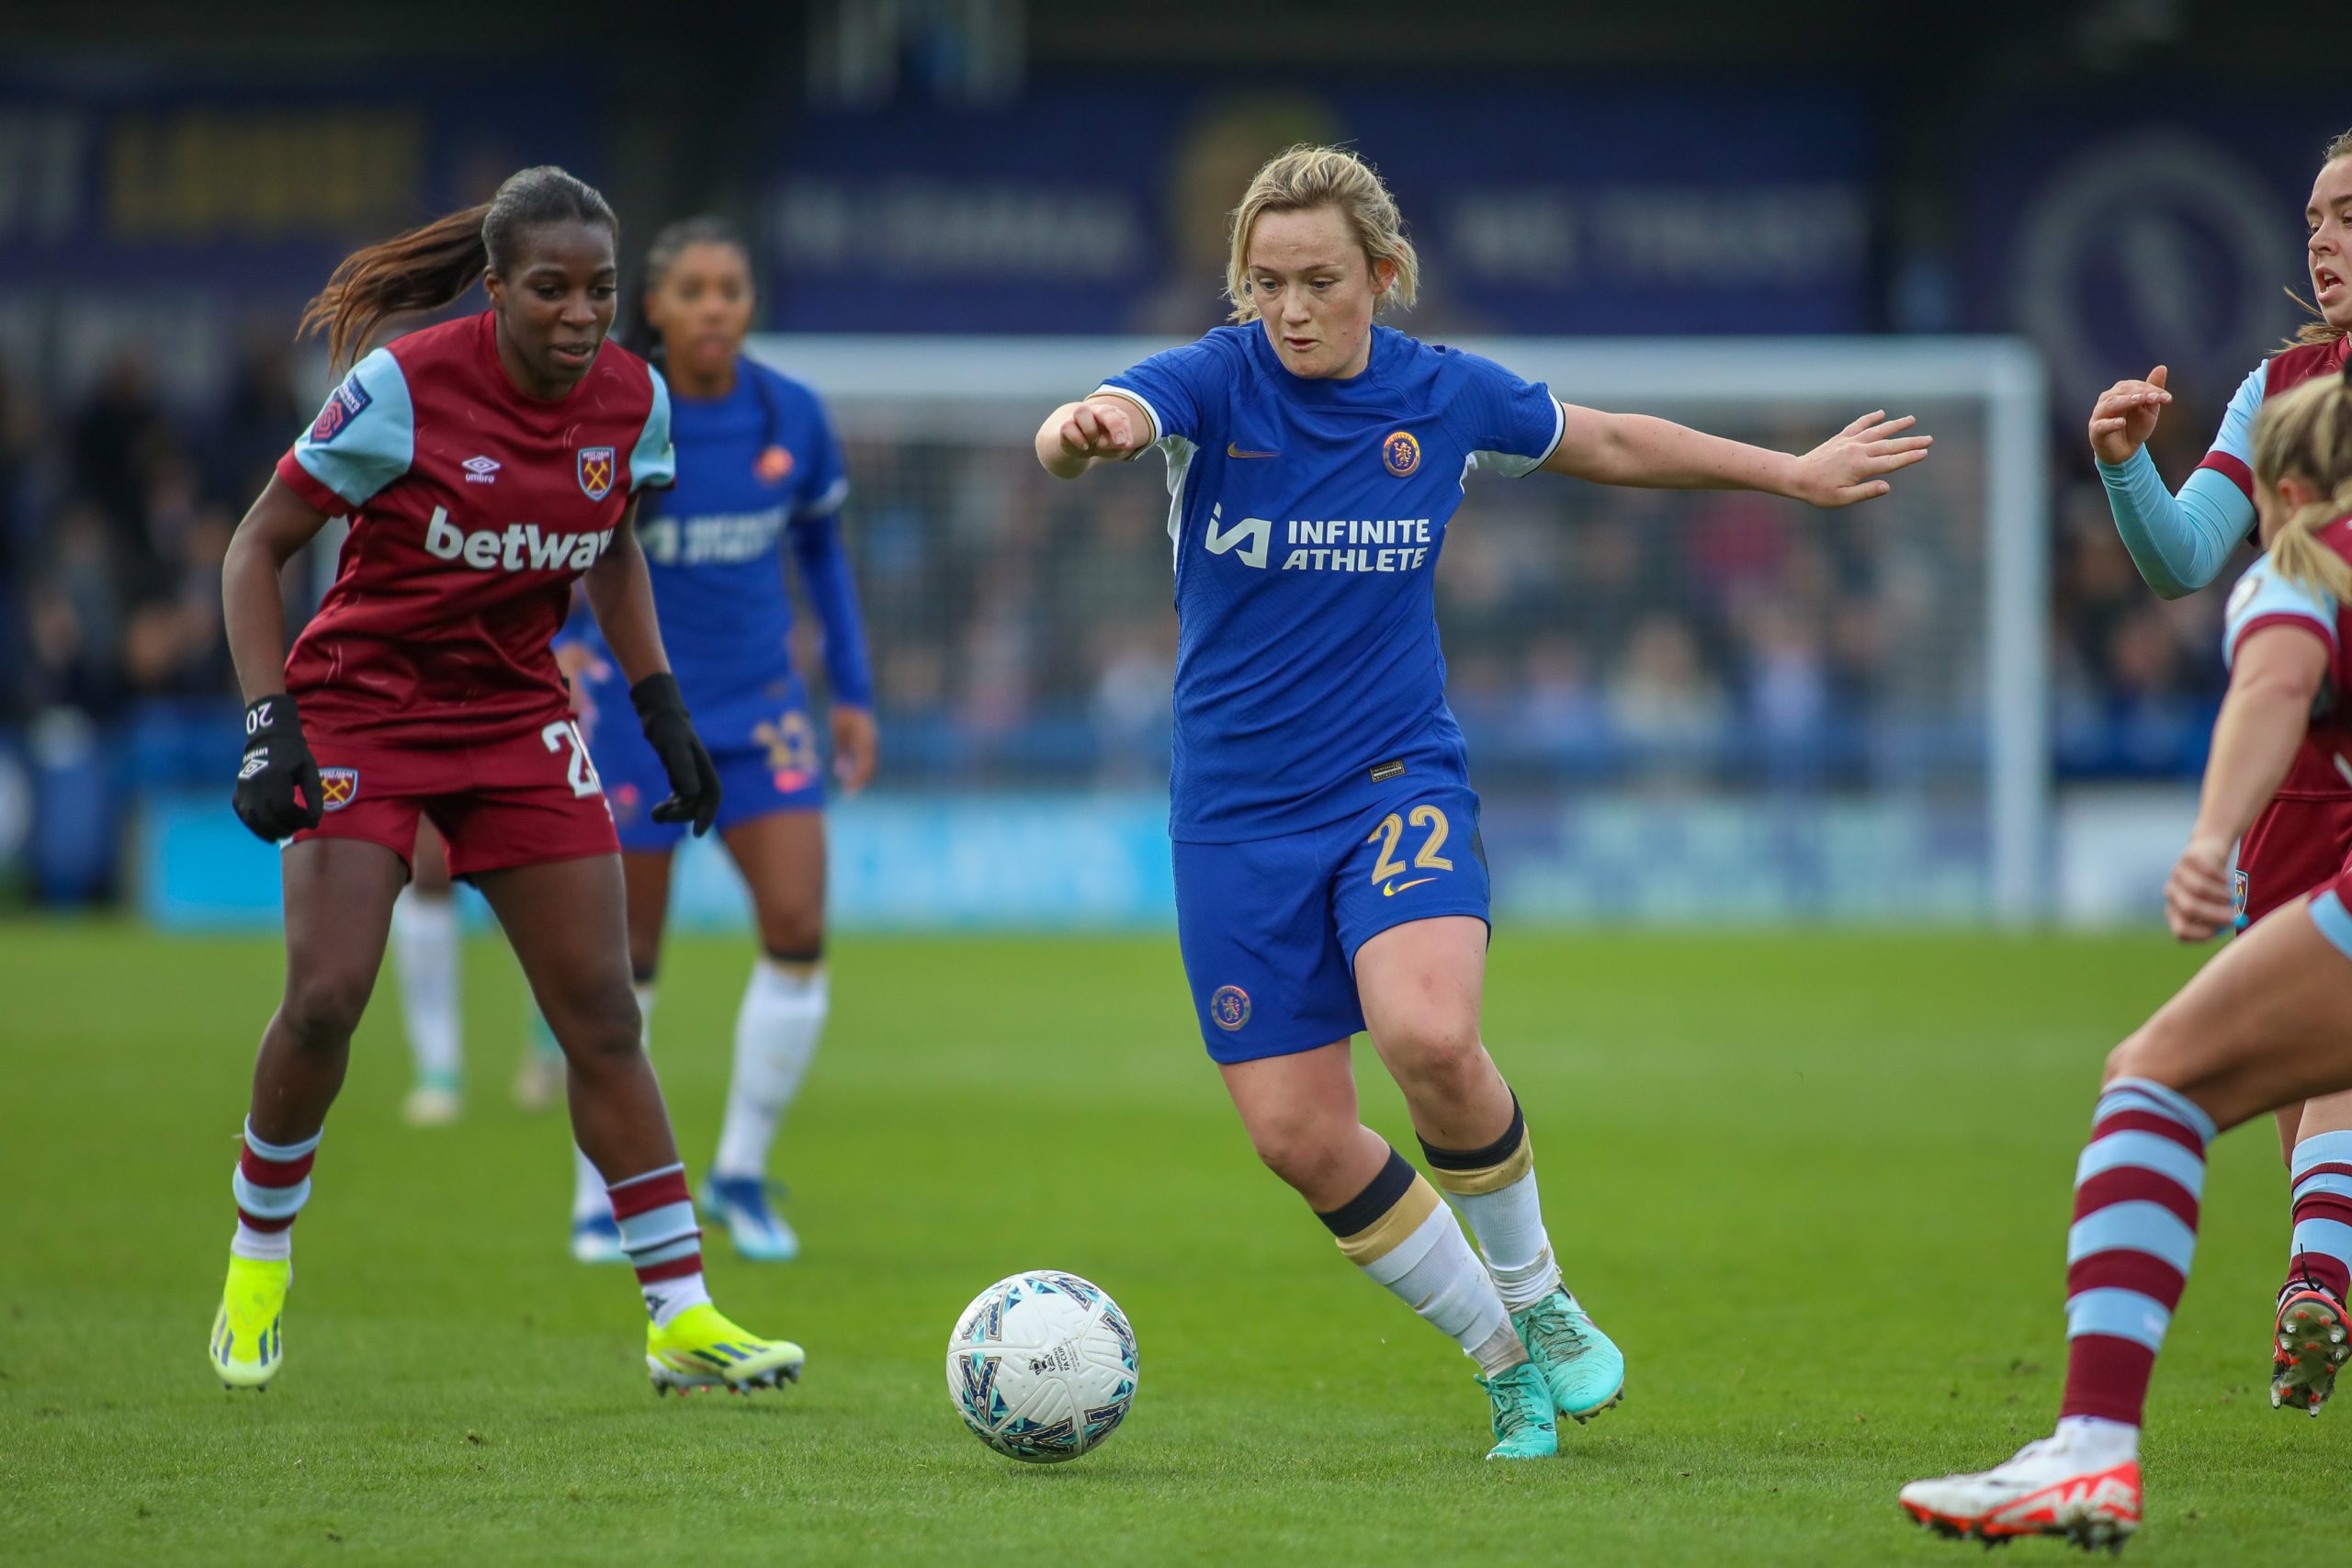 Erin Cuthbert in action during the Womens FA Cup match between Chelsea and West Ham at Kingsmeadow in London, England